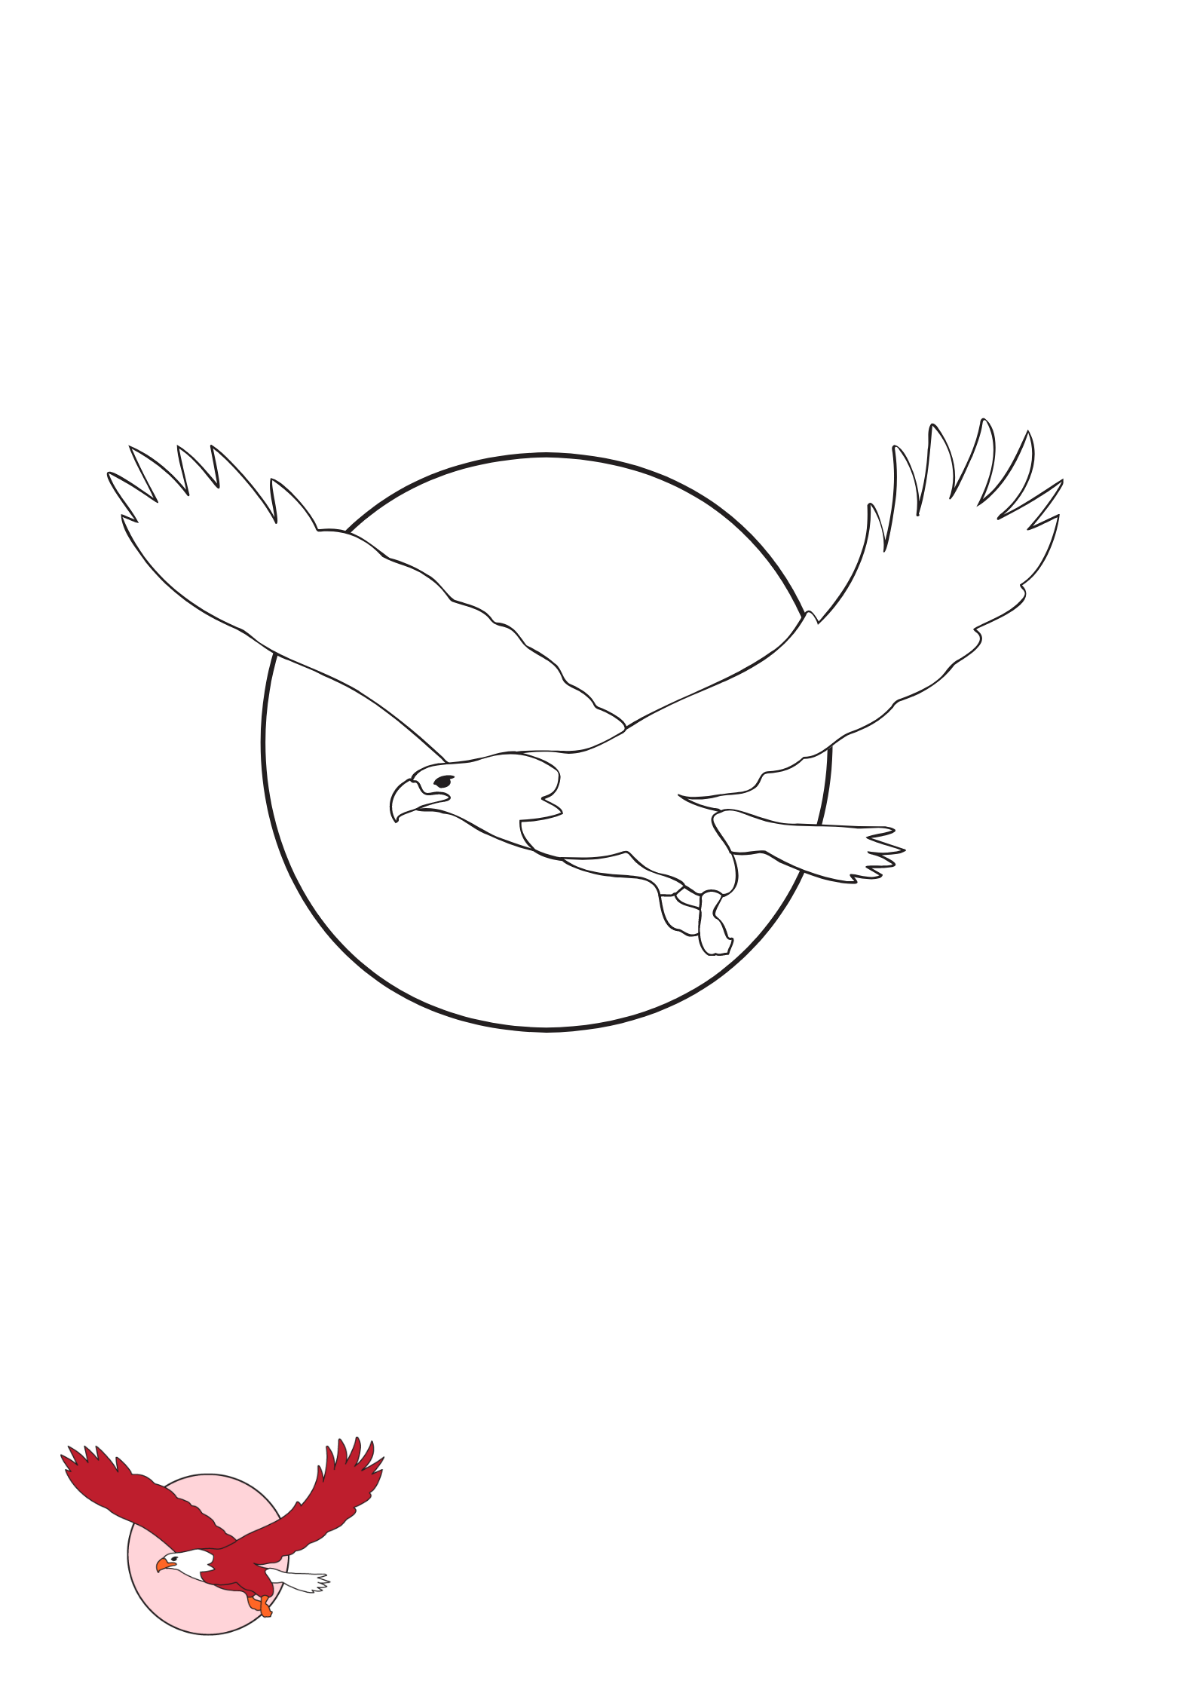 Red Eagle Coloring Page Template